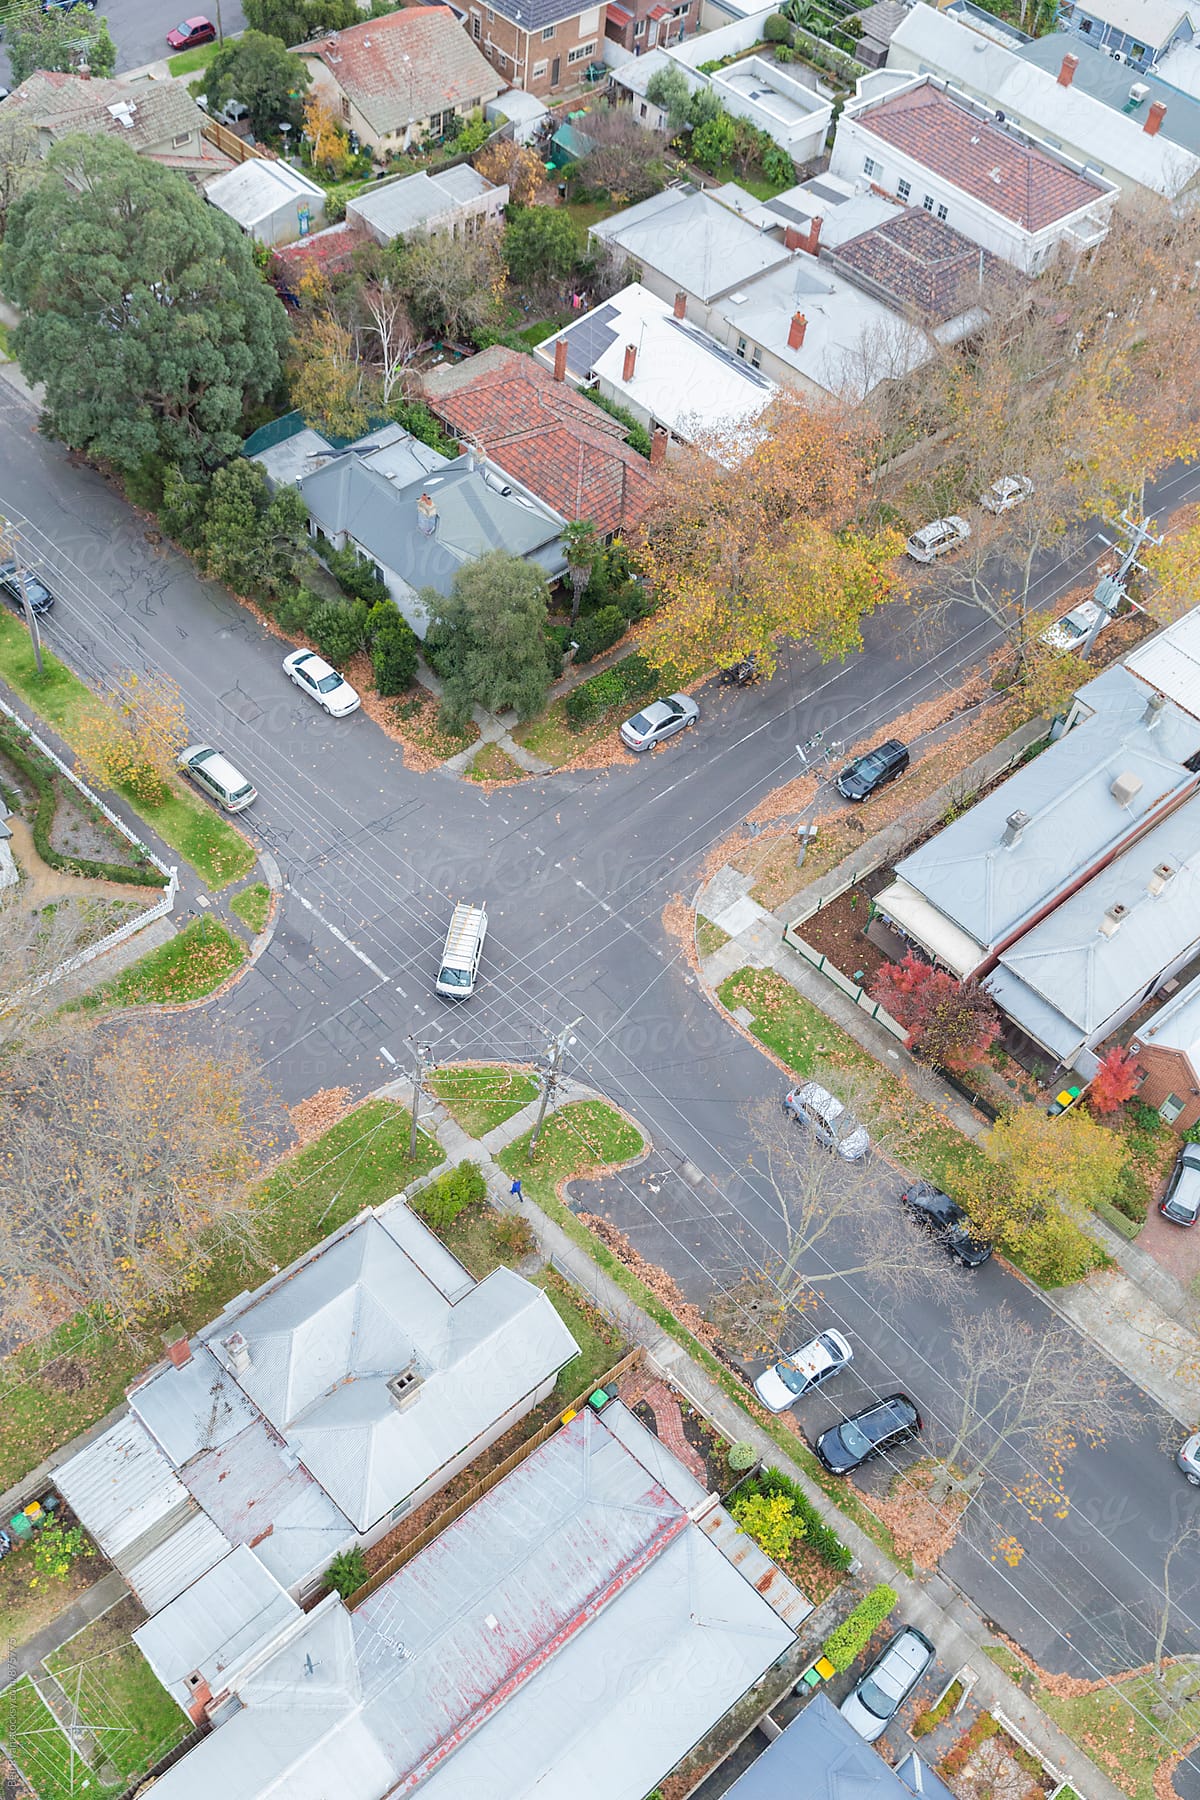 \'Overhead view of suburban street intersection